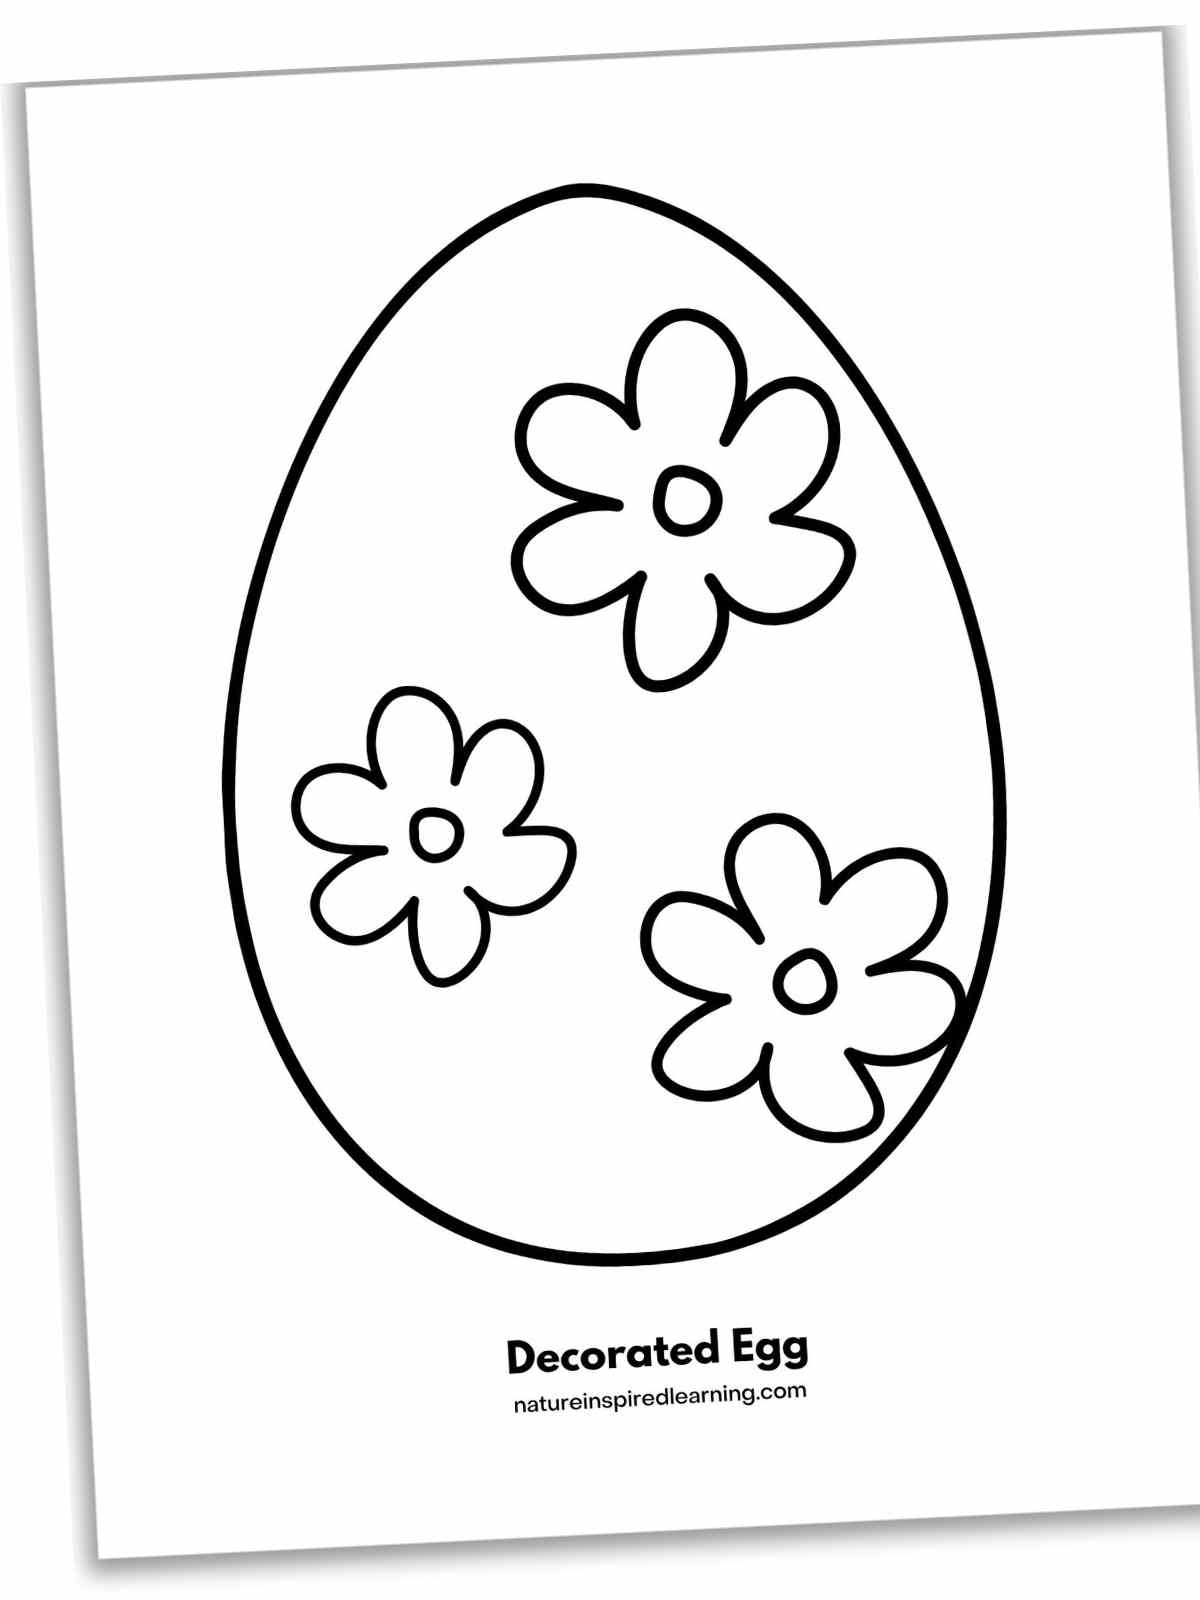 One large egg outline with four small flowers inside